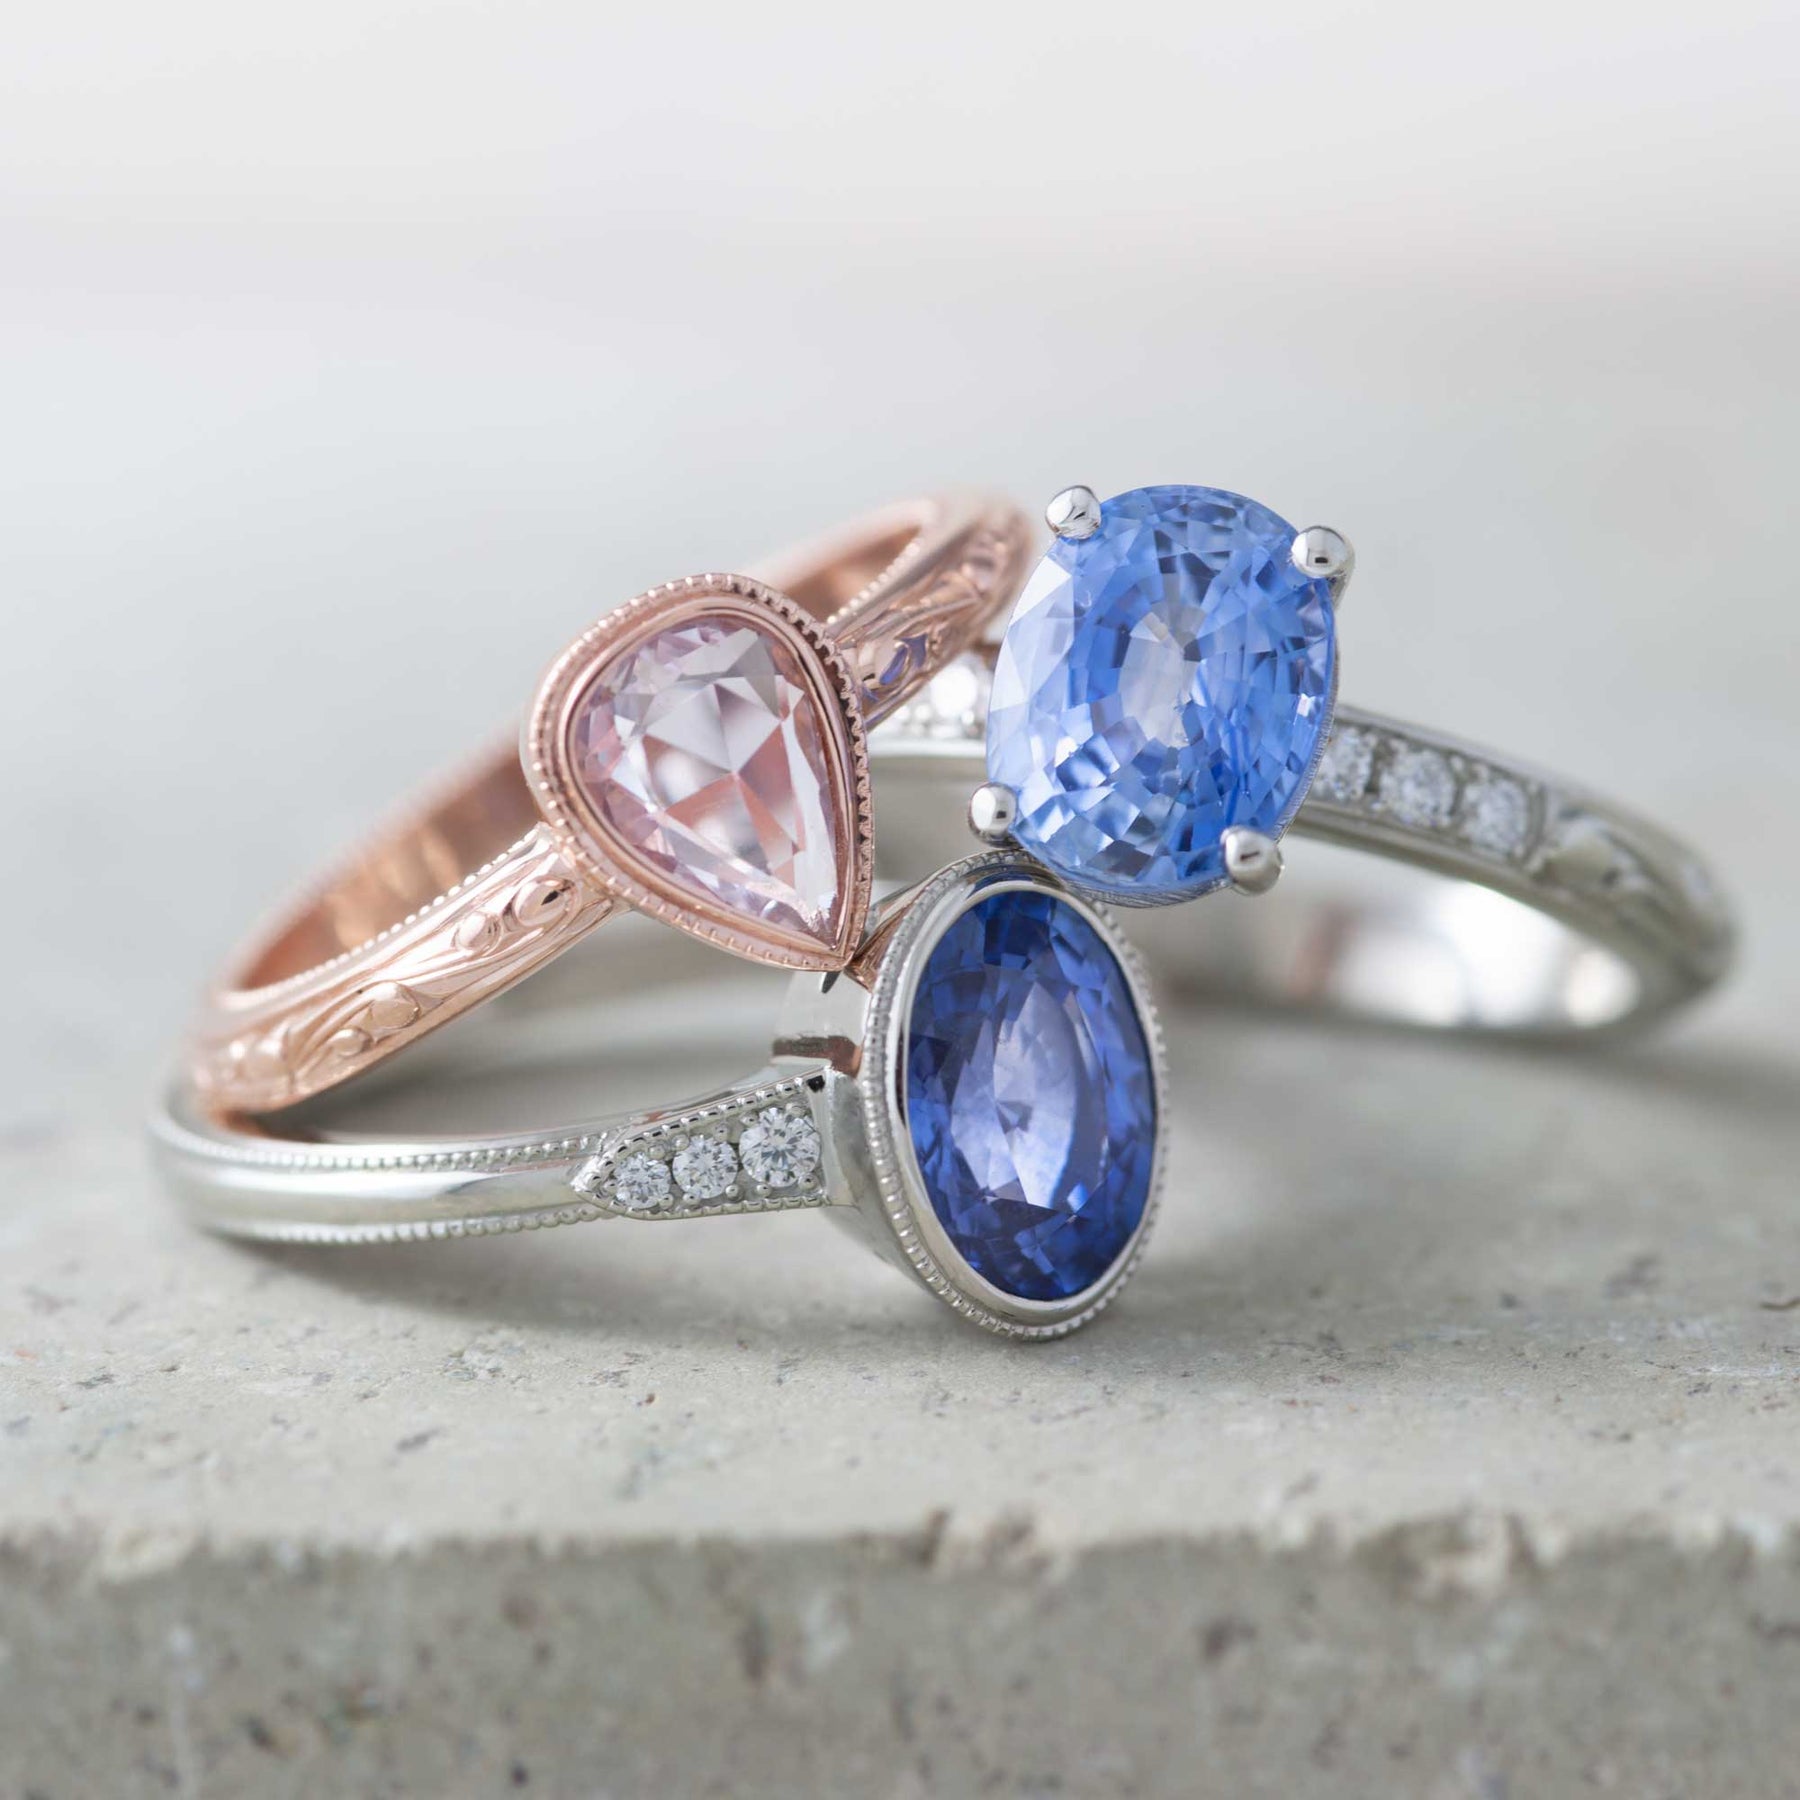 Sapphires! Fresh from the Workshop